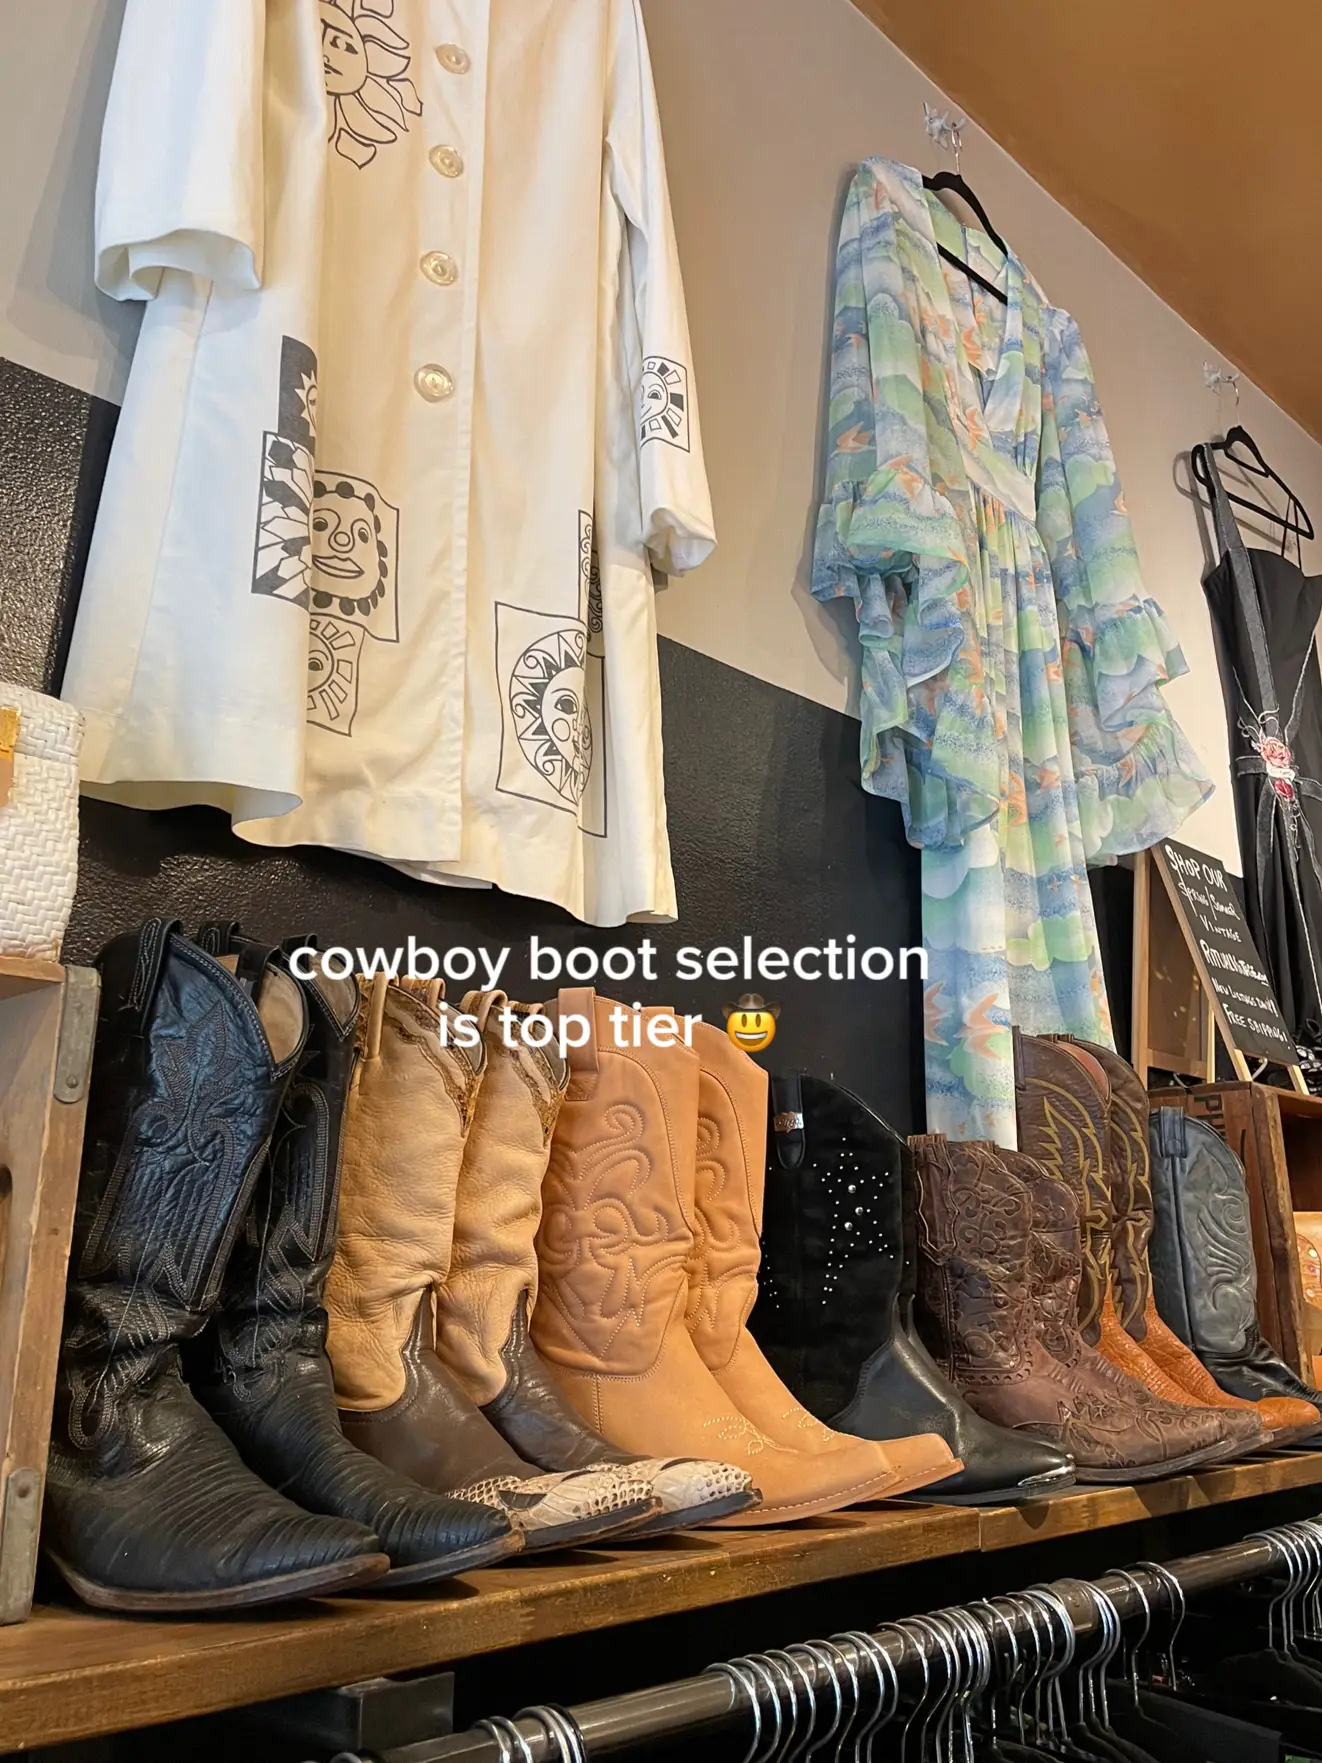 Kaylee Cowboy Boots, Much Ado Boutique